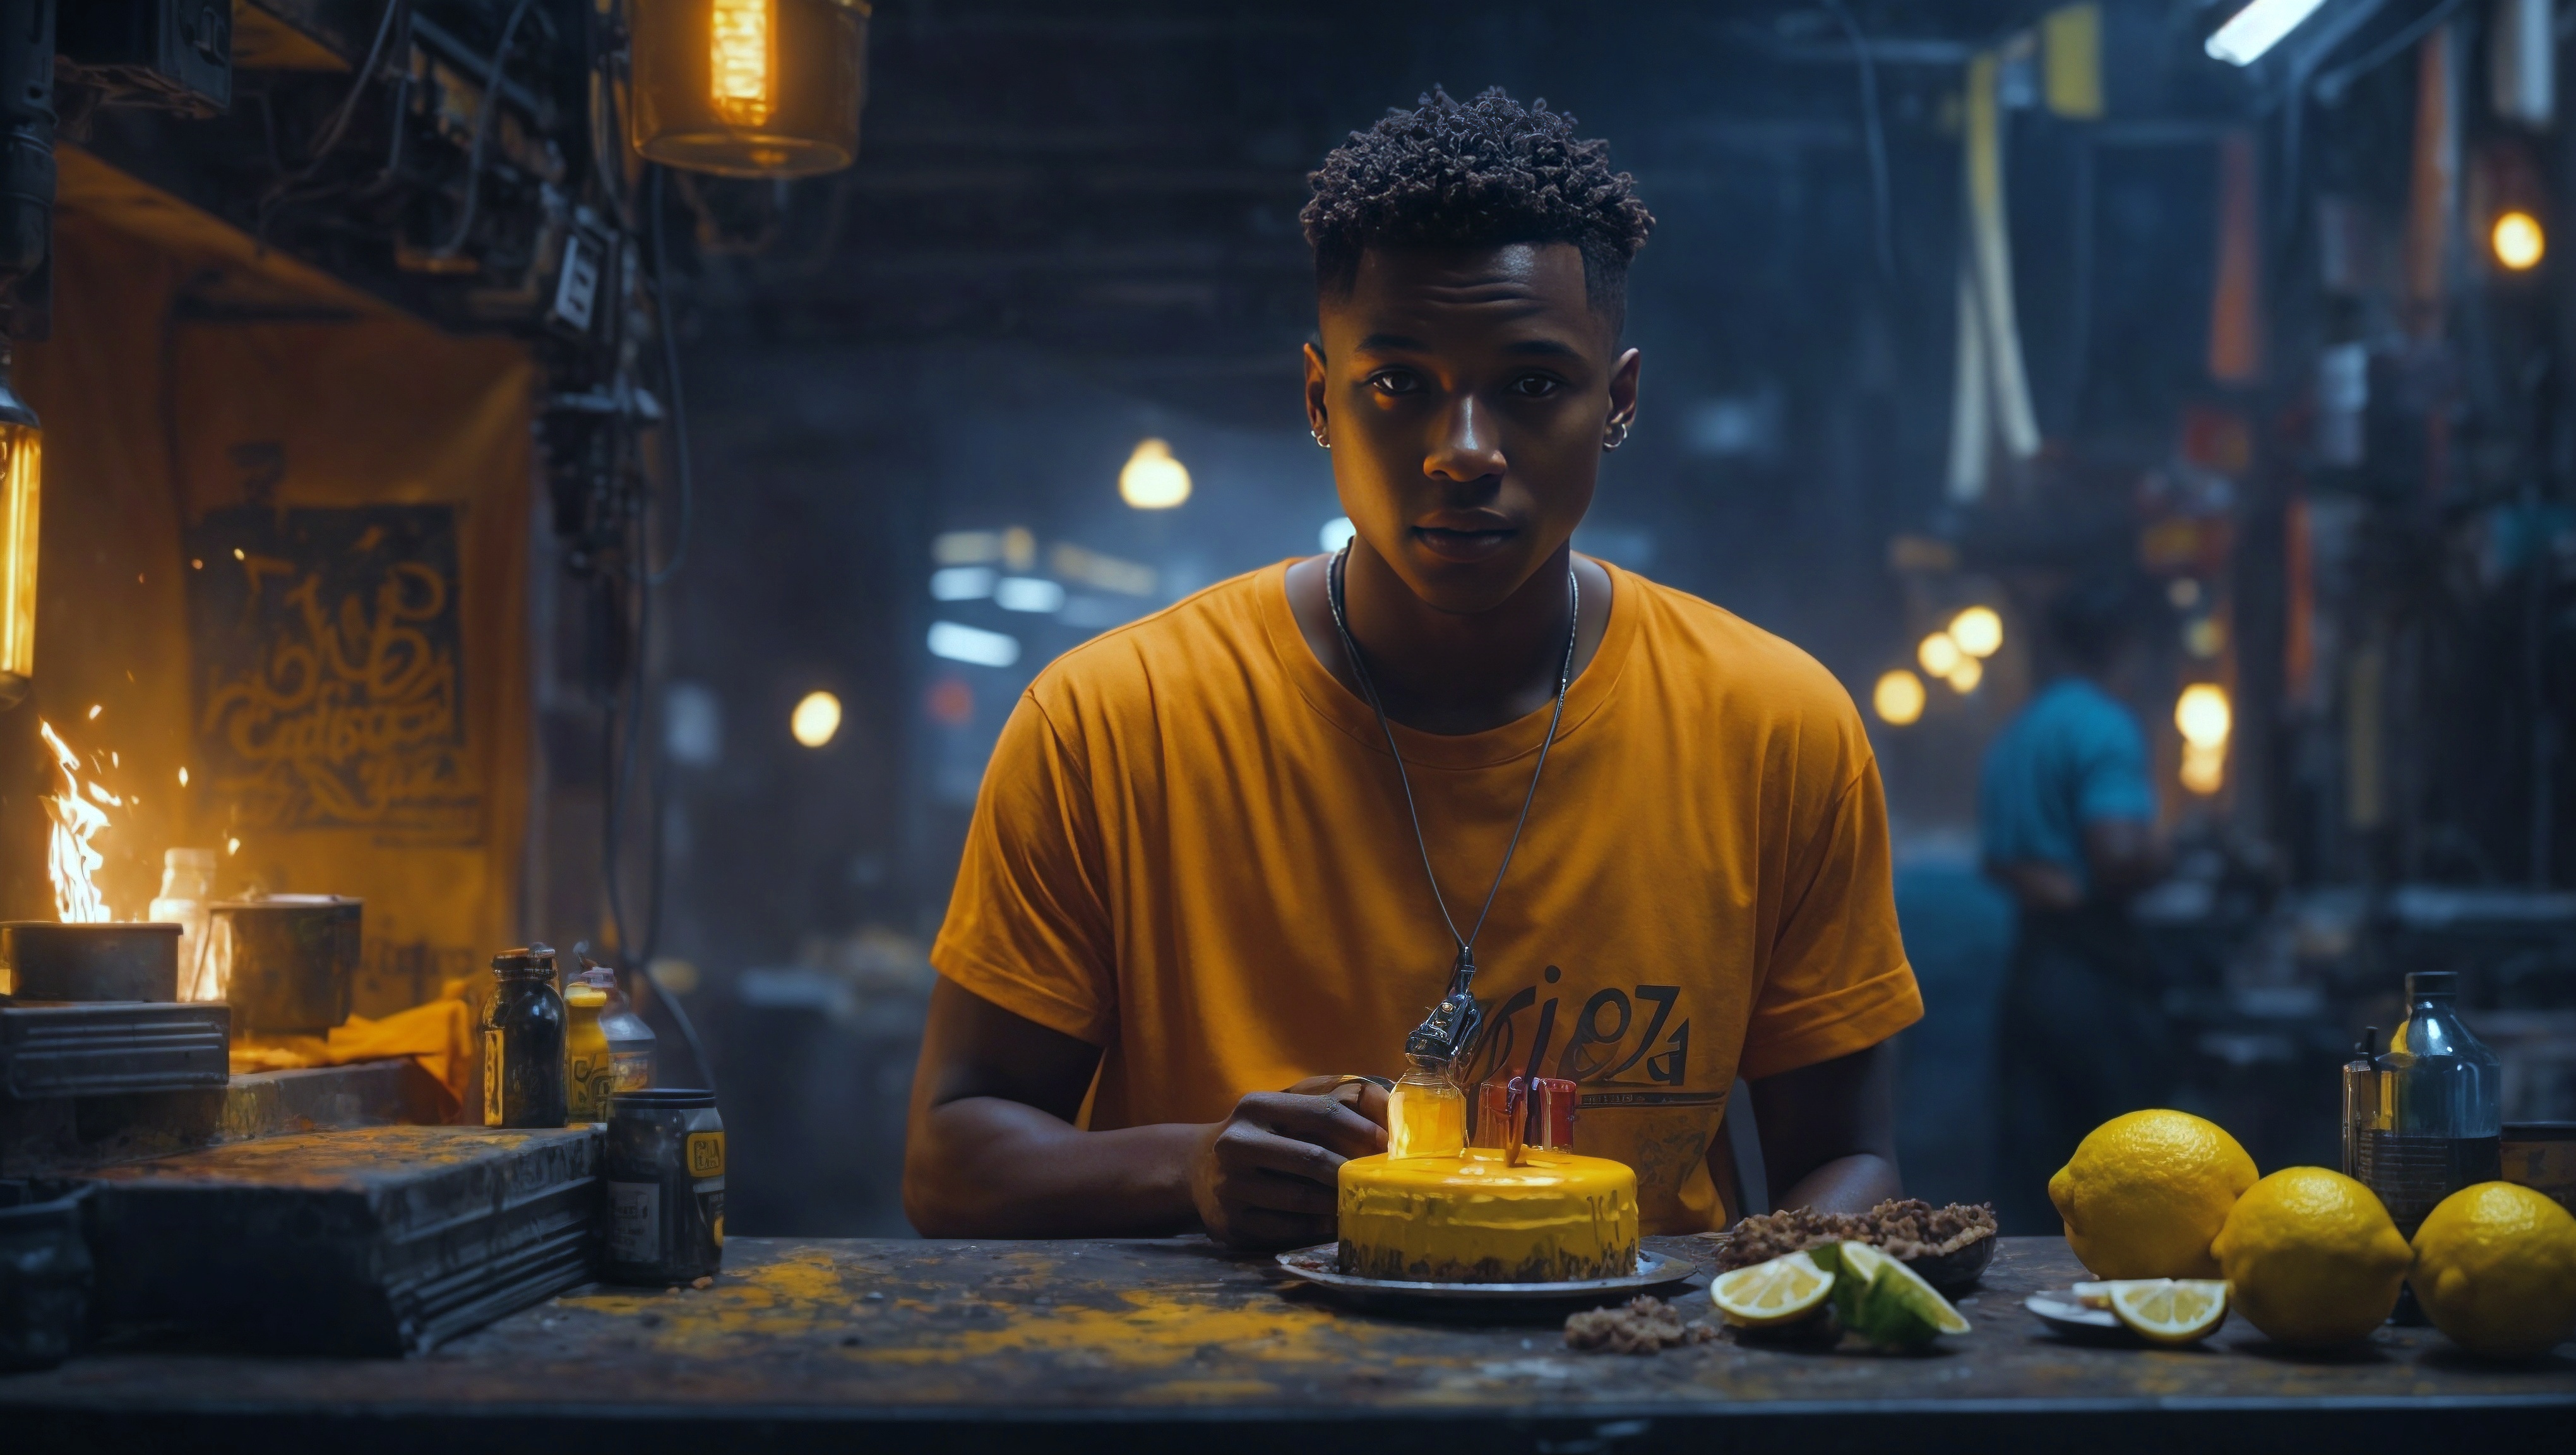 A young man standing in front of a table that has a cake with candles and lemons on it